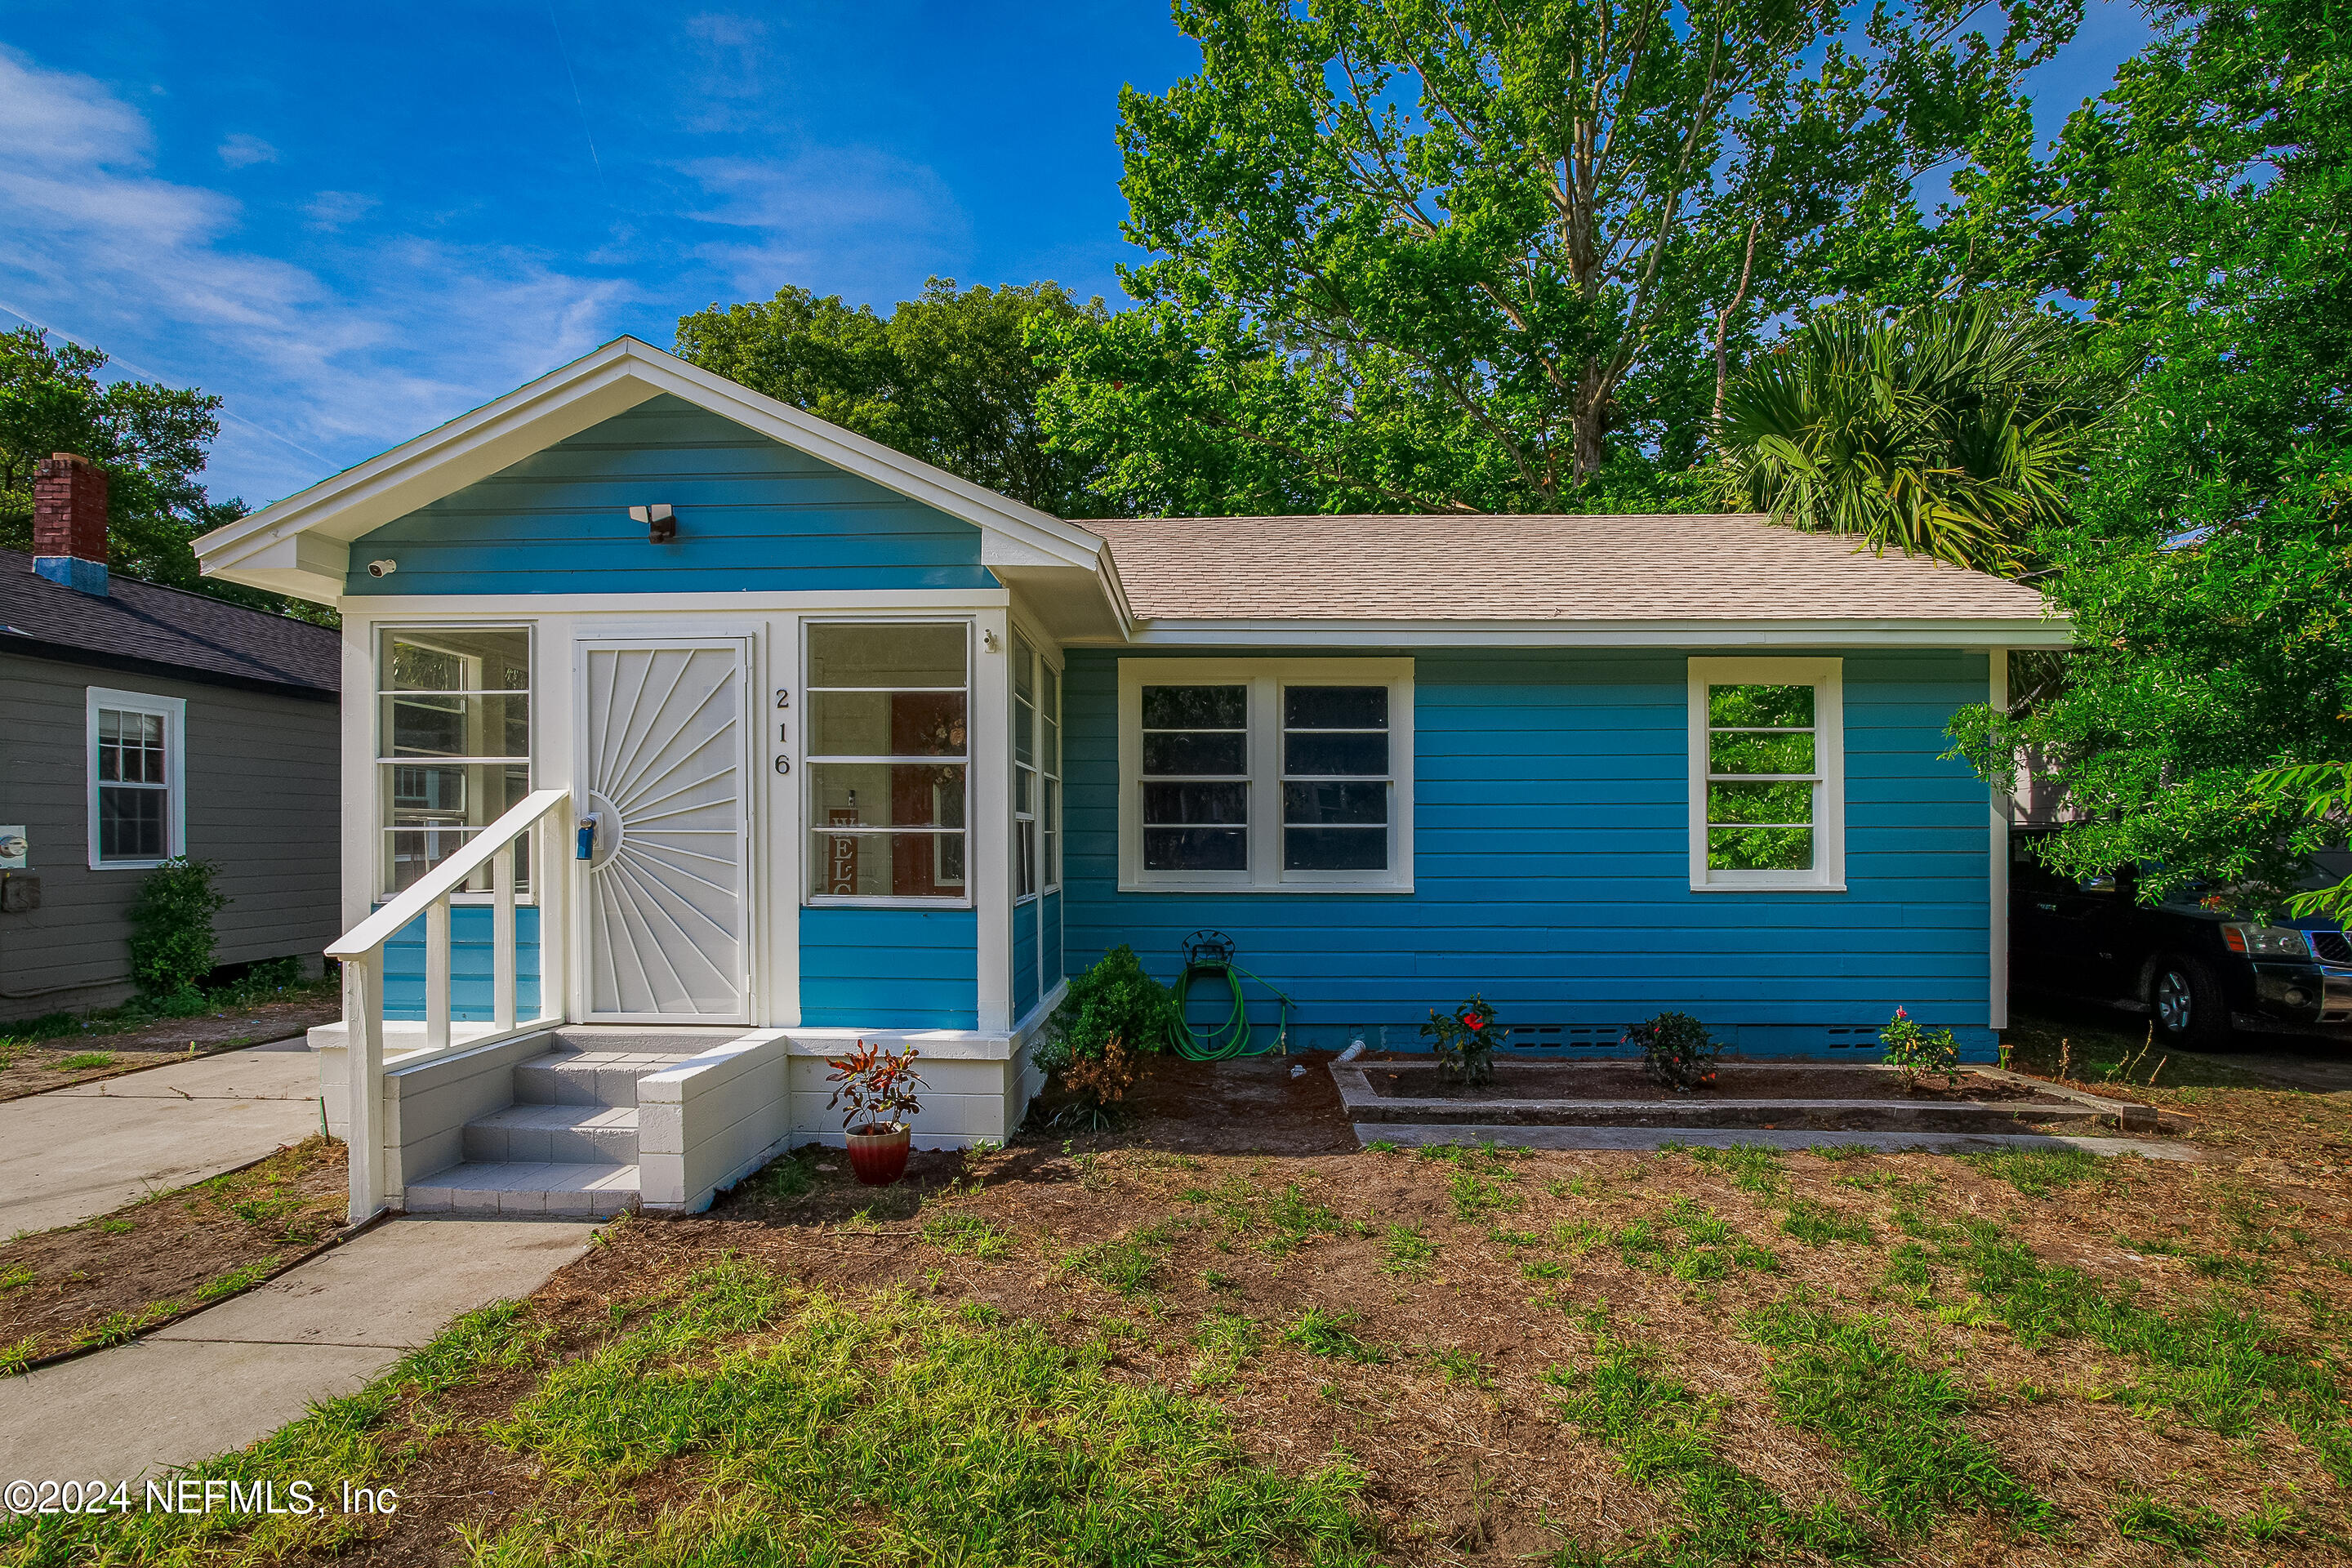 Jacksonville, FL home for sale located at 216 E 48th Street, Jacksonville, FL 32208